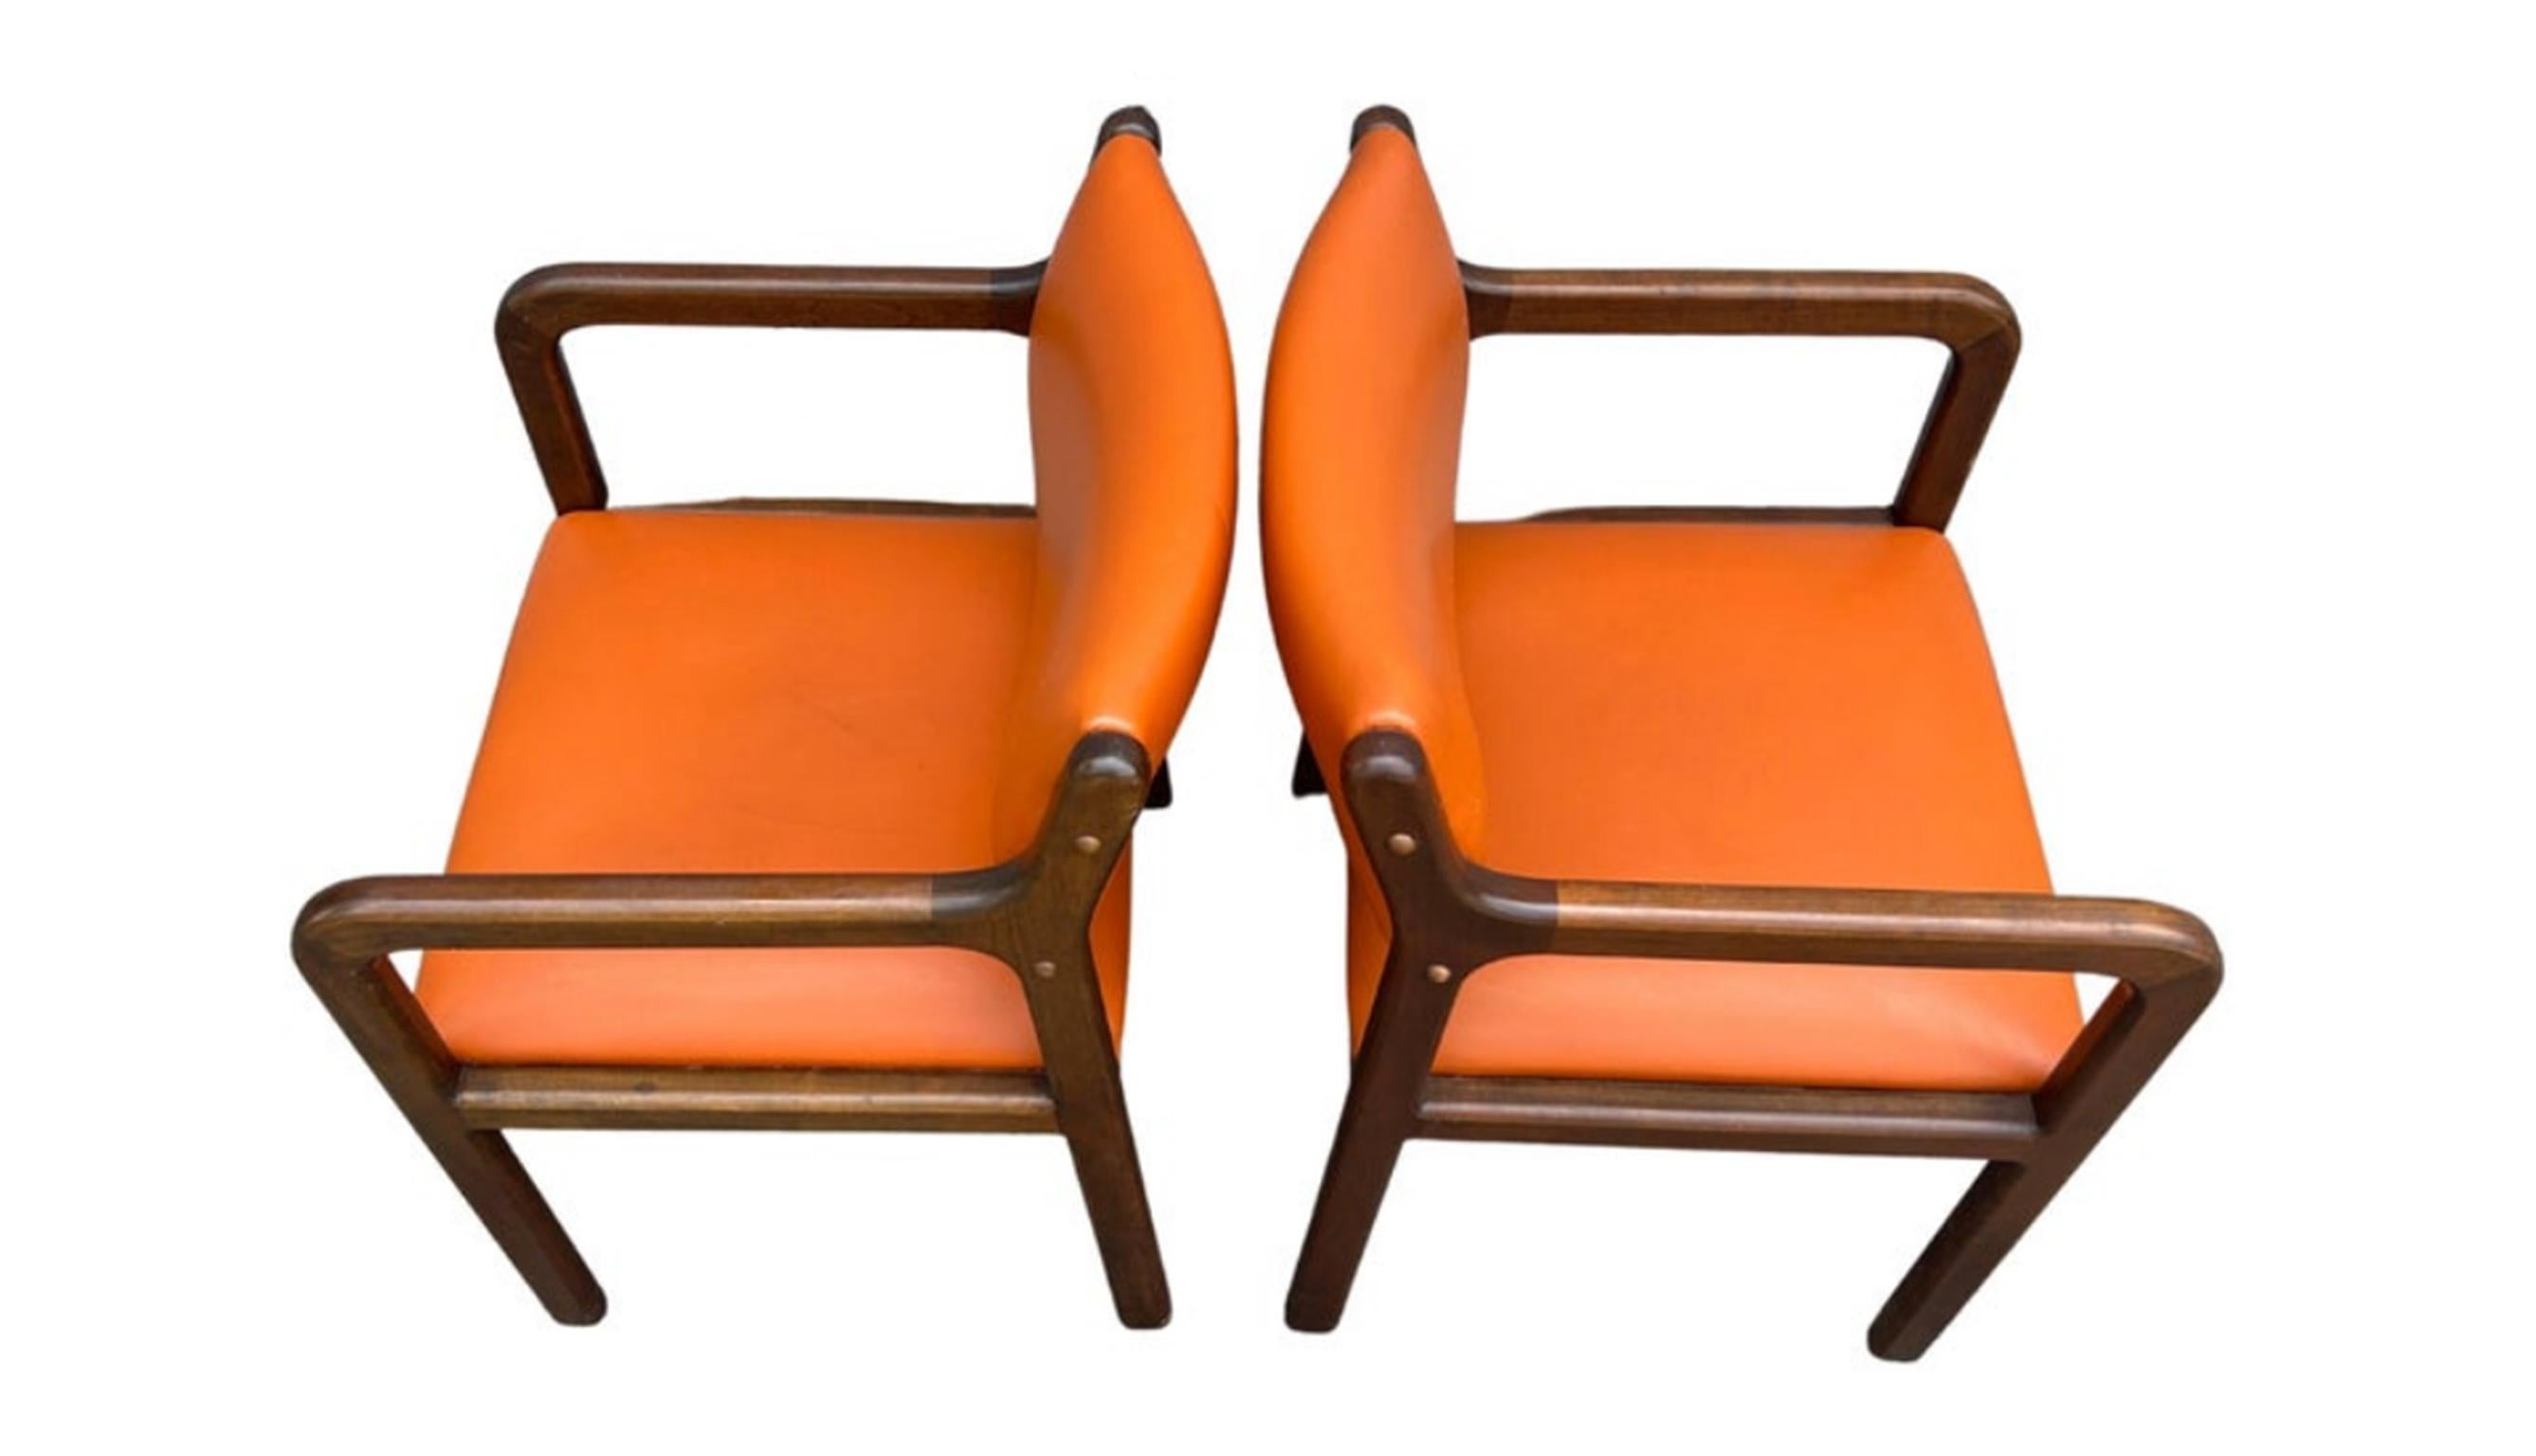 Woodwork Pair of Mid-Century Modern Rounded Walnut Arm Chairs with Orange Upholstery